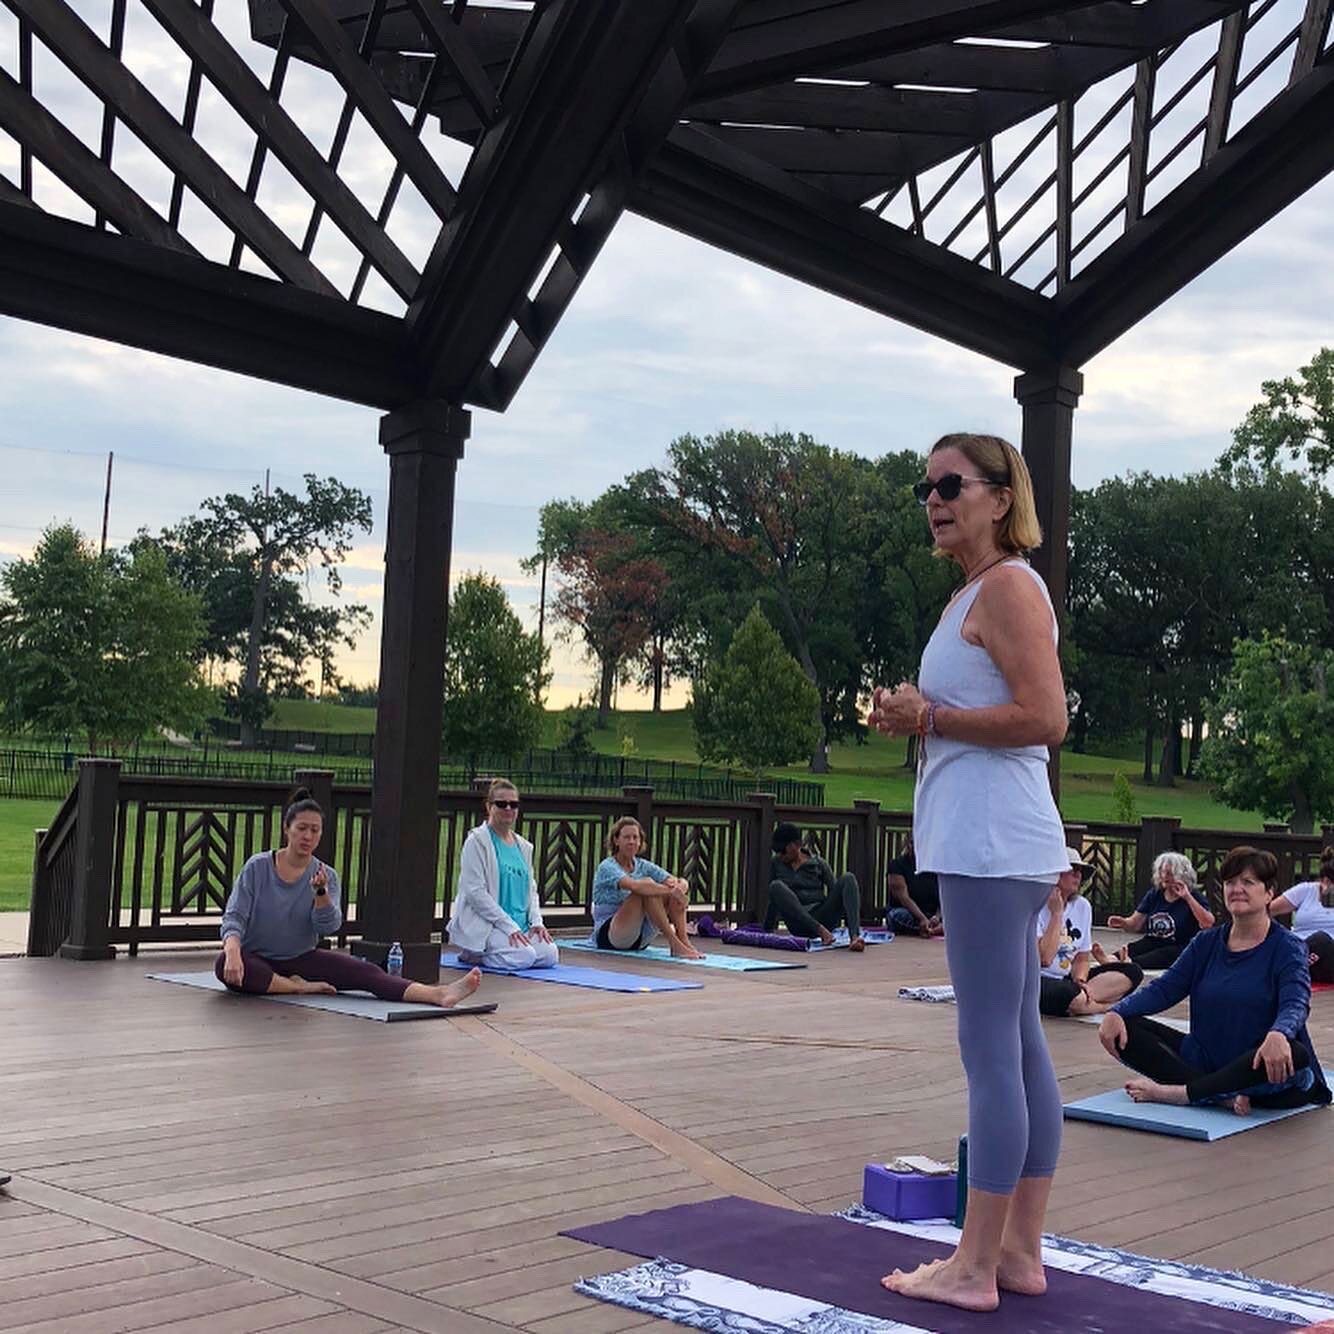 Yoga in the Park&hellip; A wonderful opportunity to bring people together in a beautiful setting.&nbsp;&nbsp;

What we practice grows stronger!&nbsp;&nbsp;

Thank you State Reps. Kelly Burke and Fran Hurley along with State Senator Bill Cunningham fo